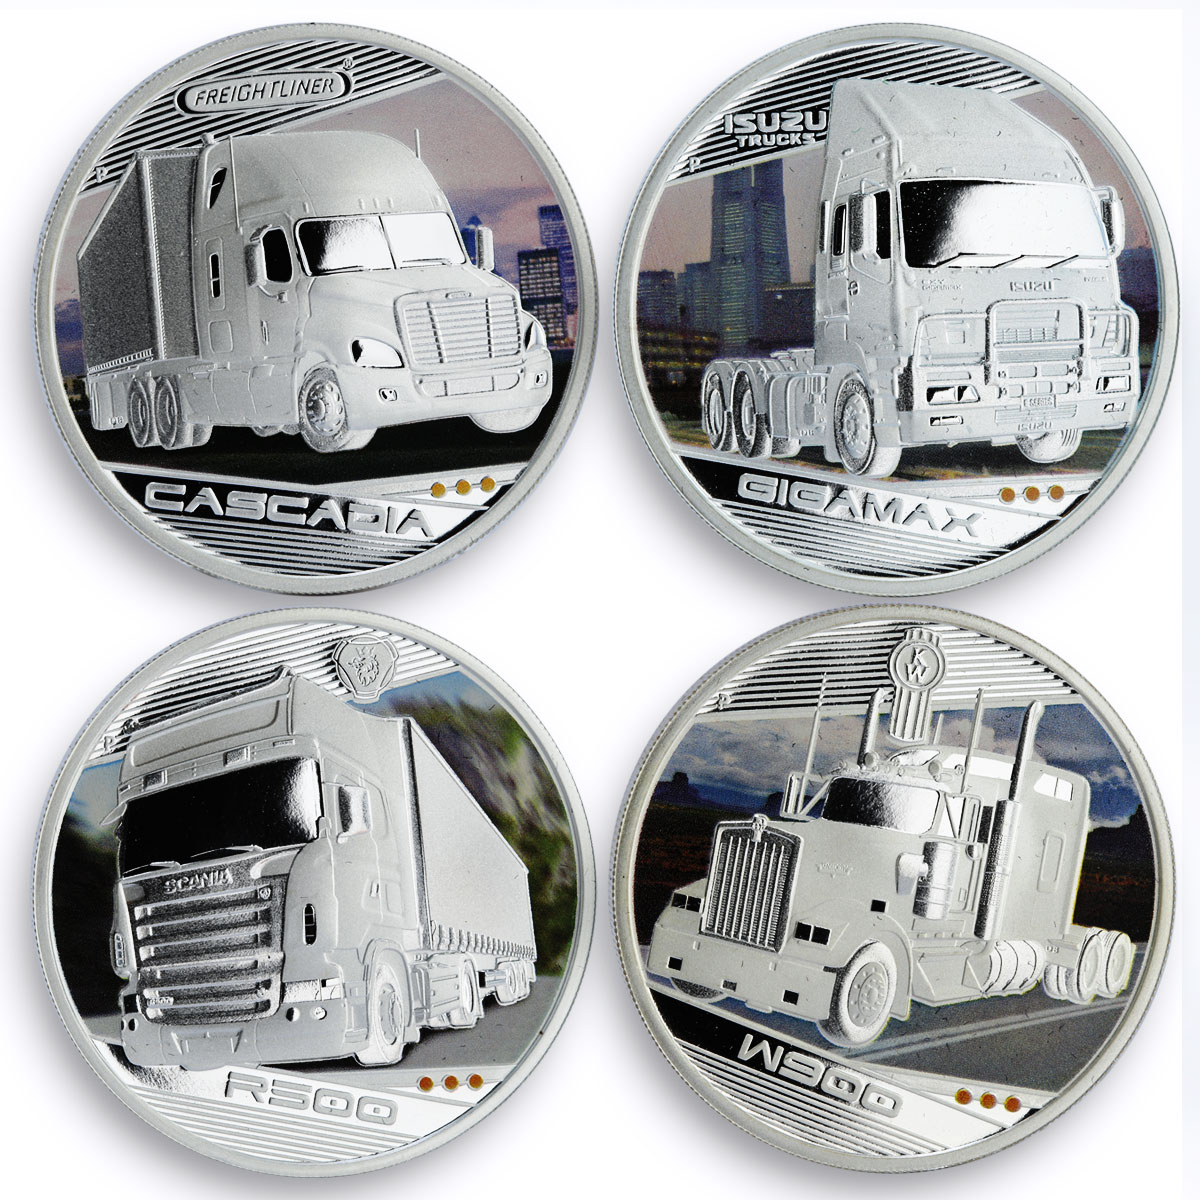 Tuvalu set of 4 coins Kings of the Road proof silver coins 2010